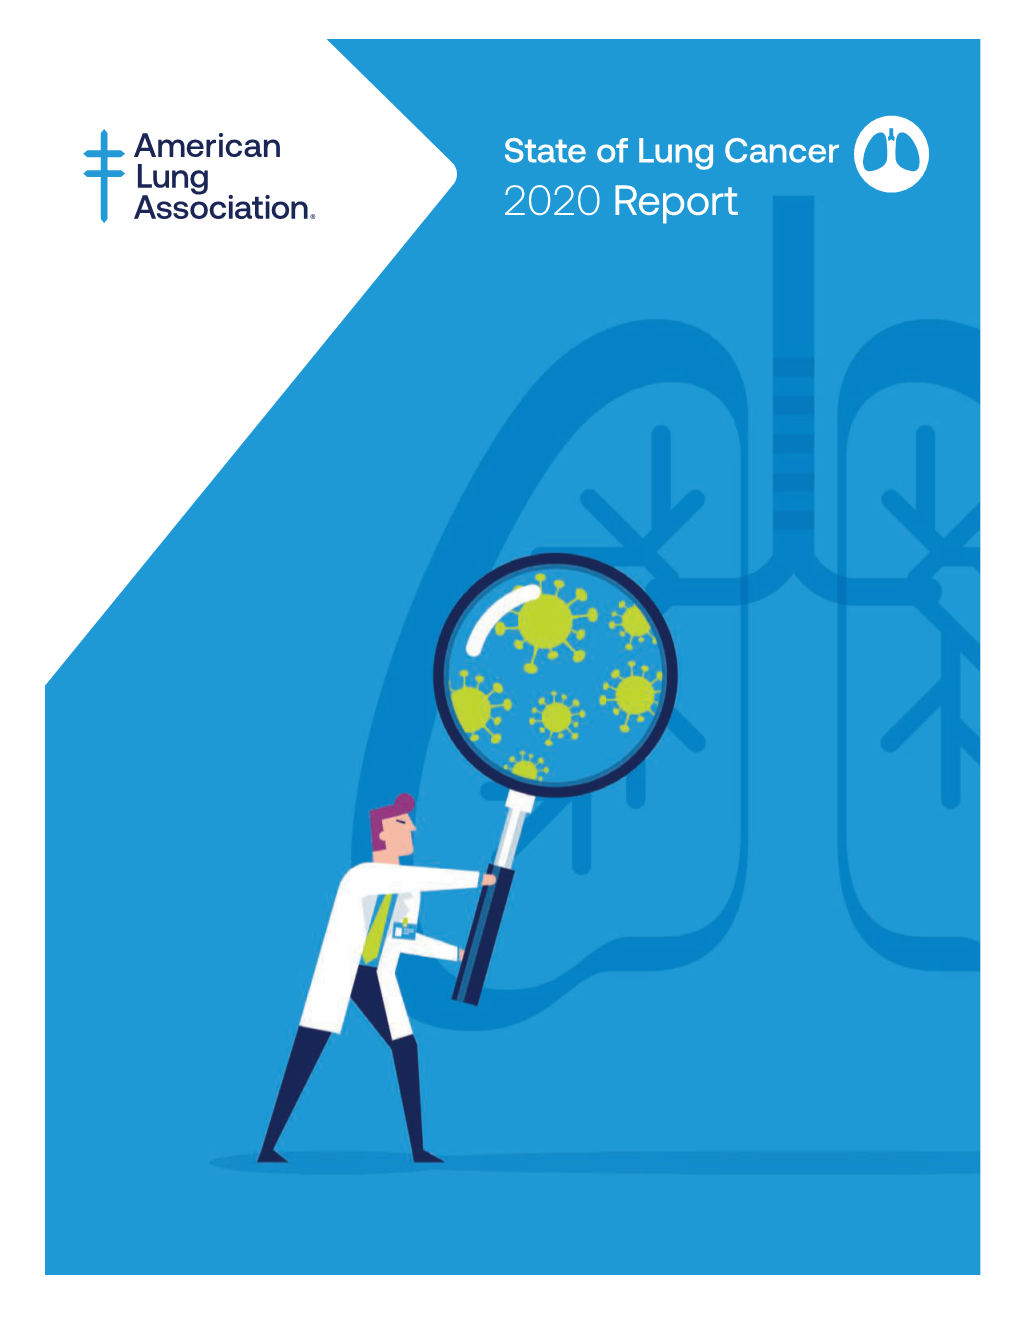 State of Lung Cancer 2020 Report